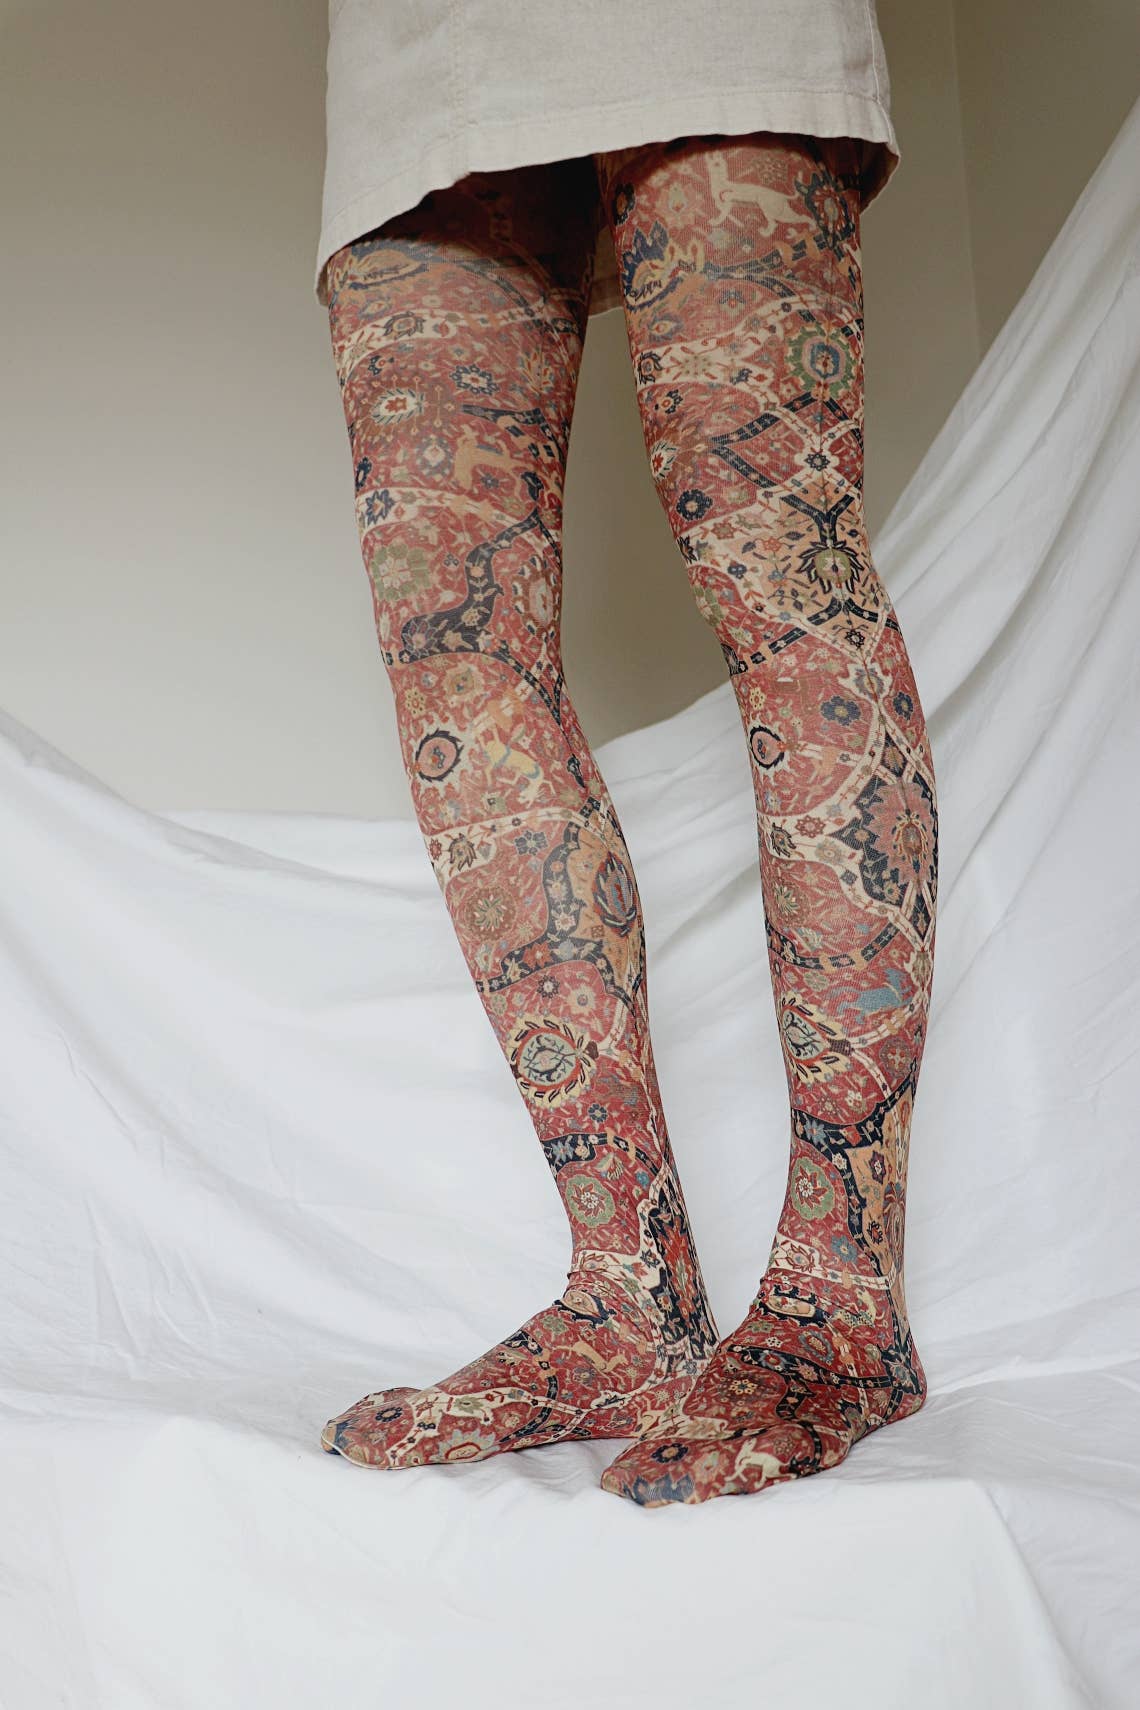 Tattoo Tights With Ivy Leafs Print, Handprinted Womens Pantyhose,poison Ivy Printed  Tights - Etsy | Tattoo tights, Tattoos, Women